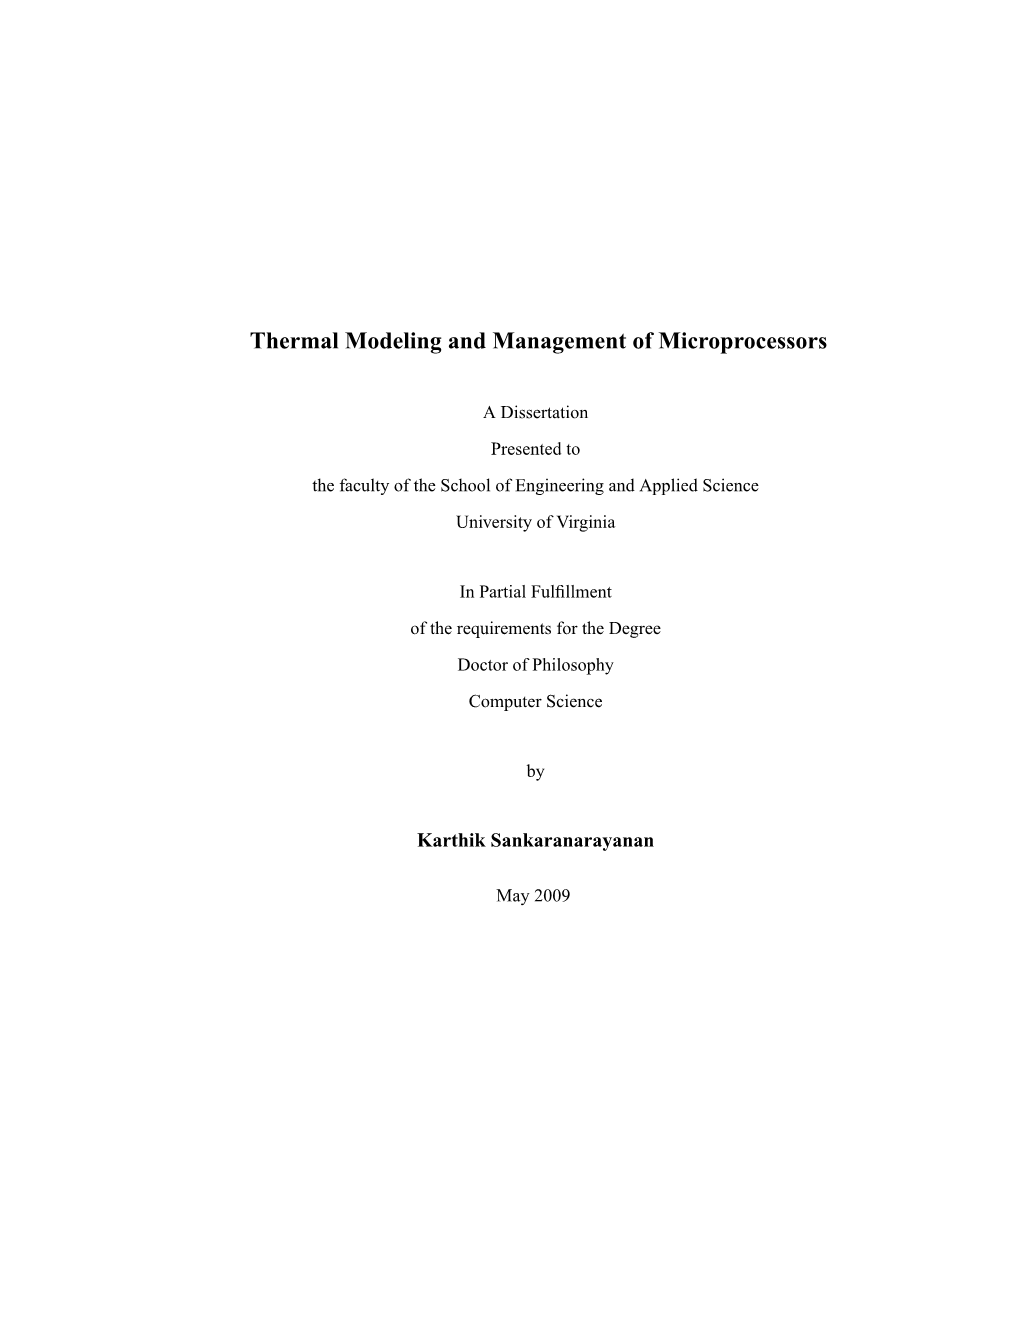 Thermal Modeling and Management of Microprocessors